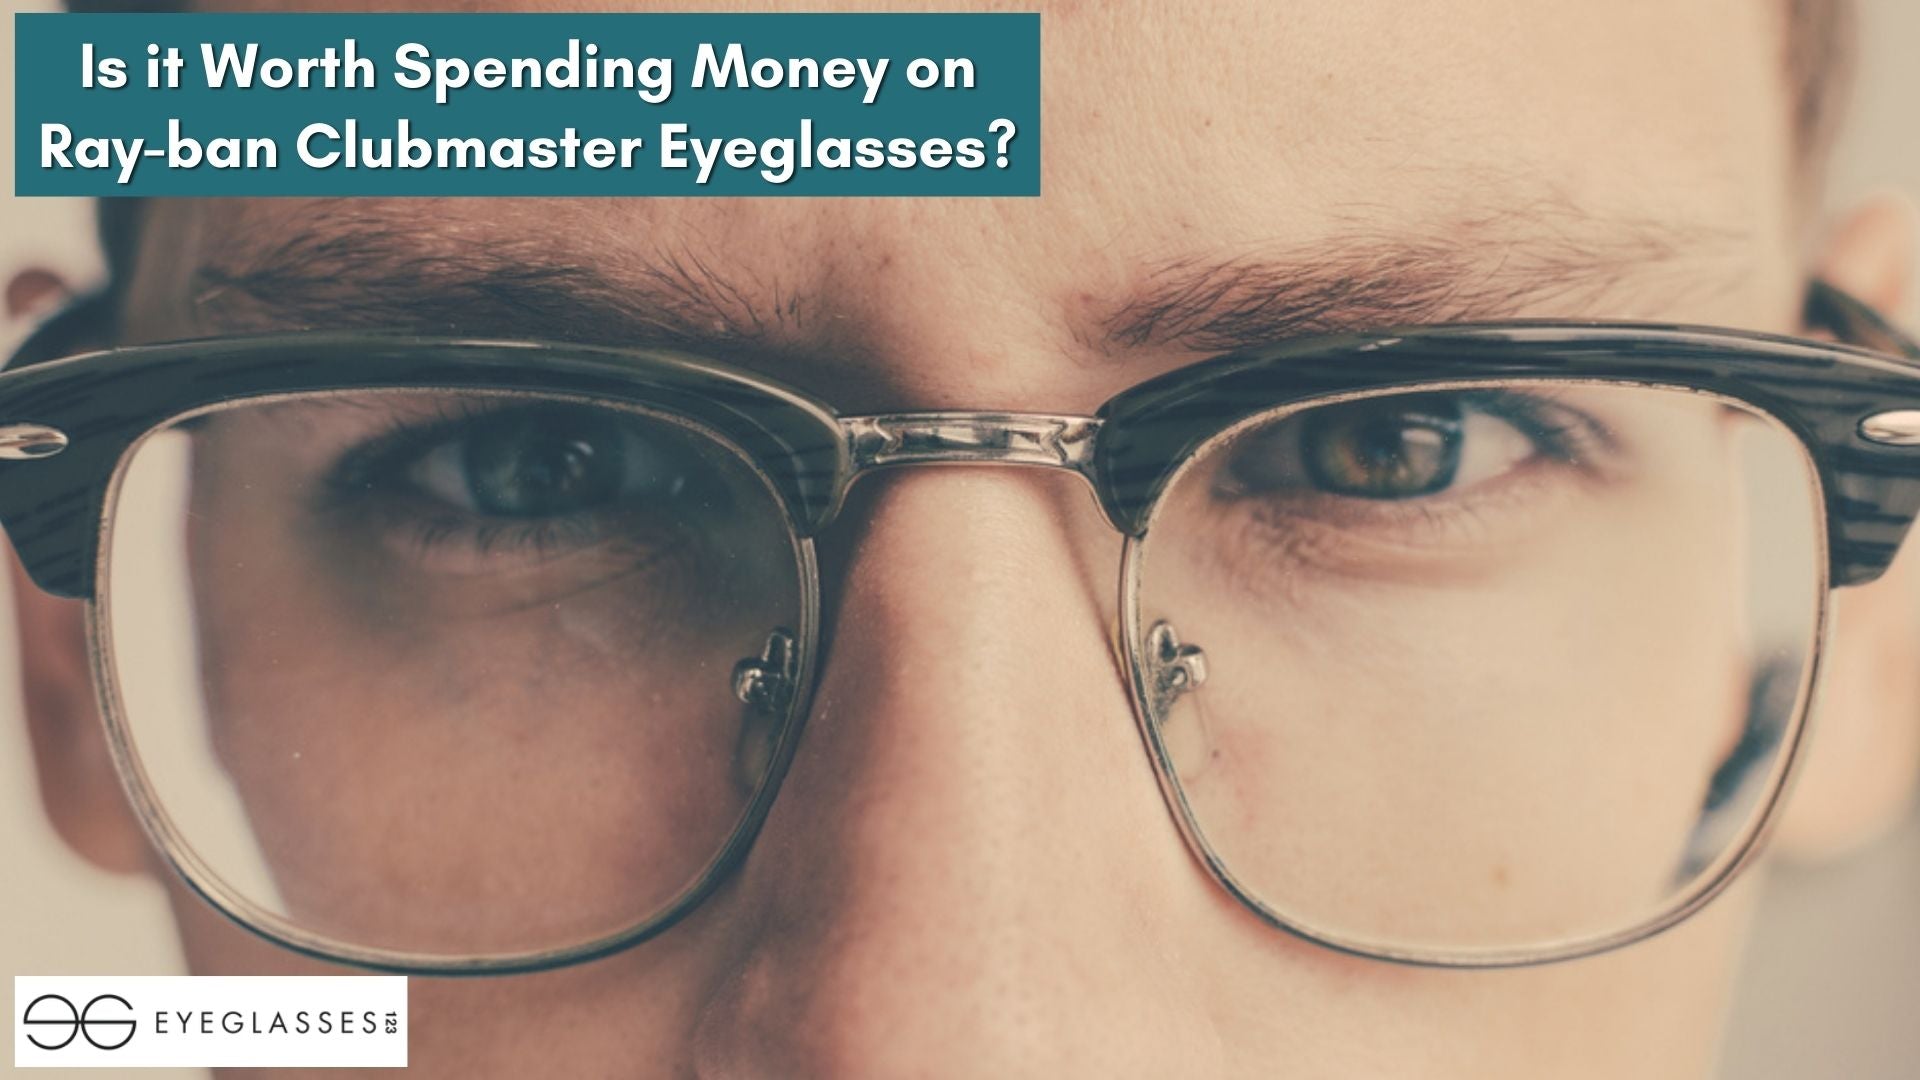 Is it Worth Spending Money on Ray-ban Clubmaster Eyeglasses?